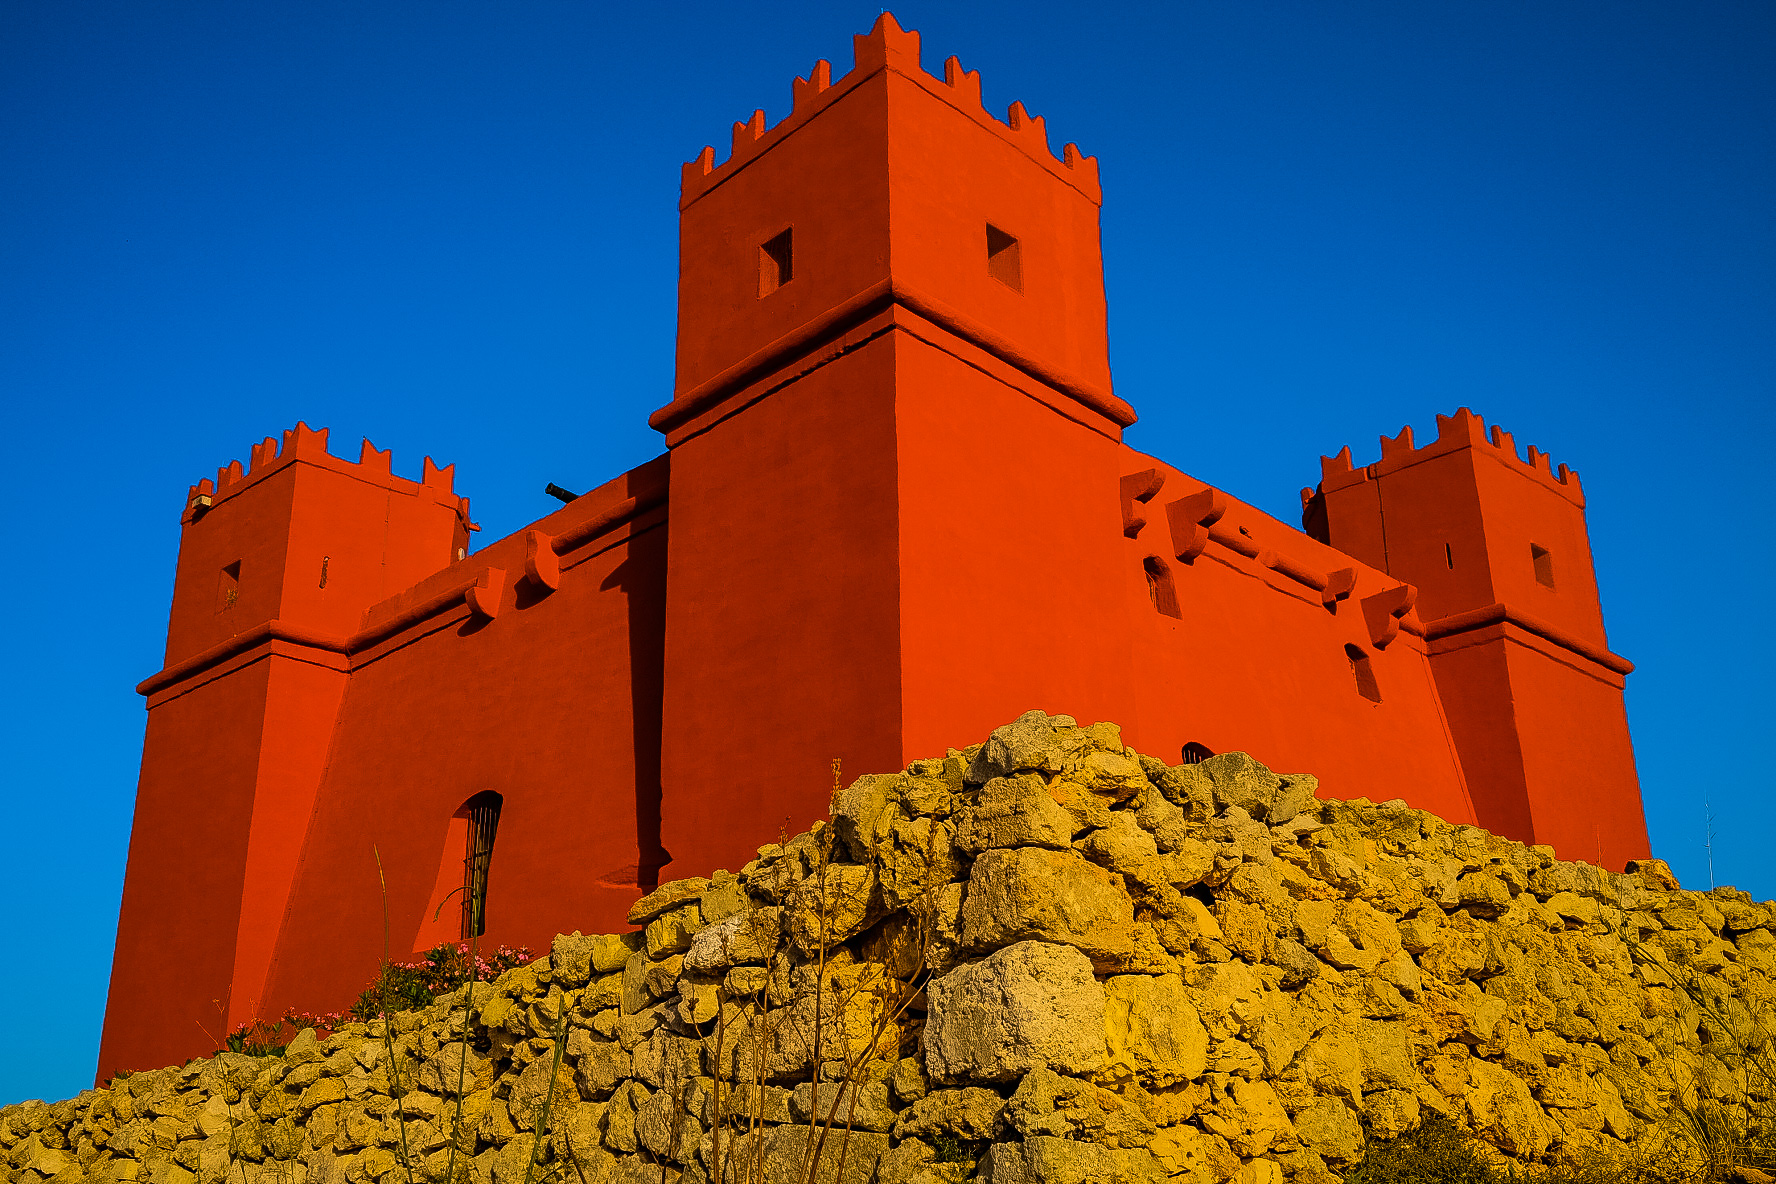 chant Total opretholde File:The Red Tower, Mellieħa.jpg - Wikimedia Commons